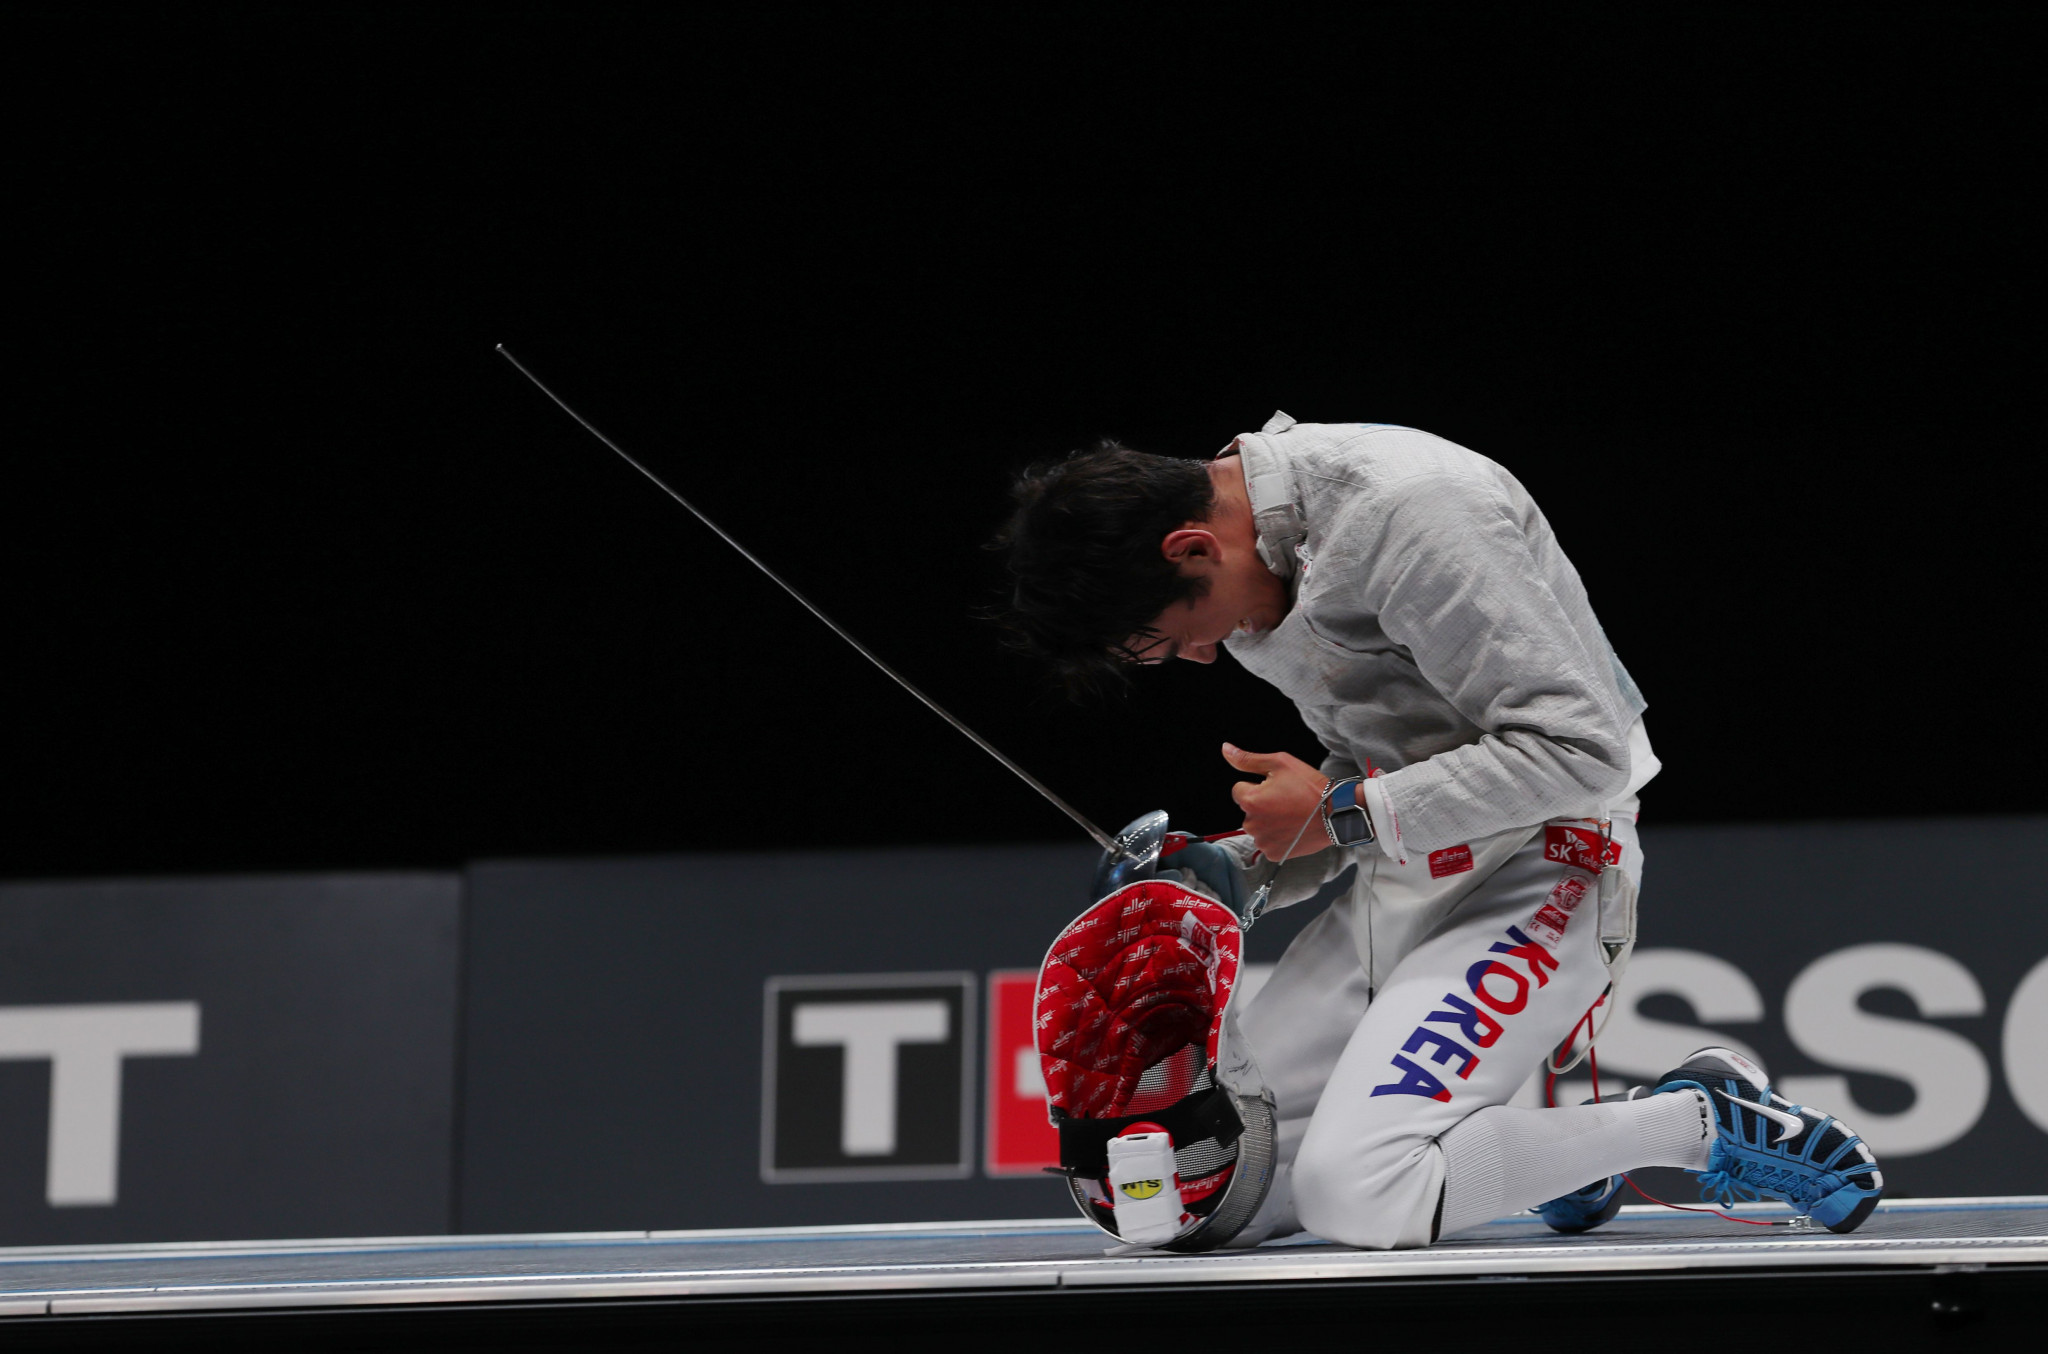 Kim and Navarria crowned first gold medallists at World Fencing Championships